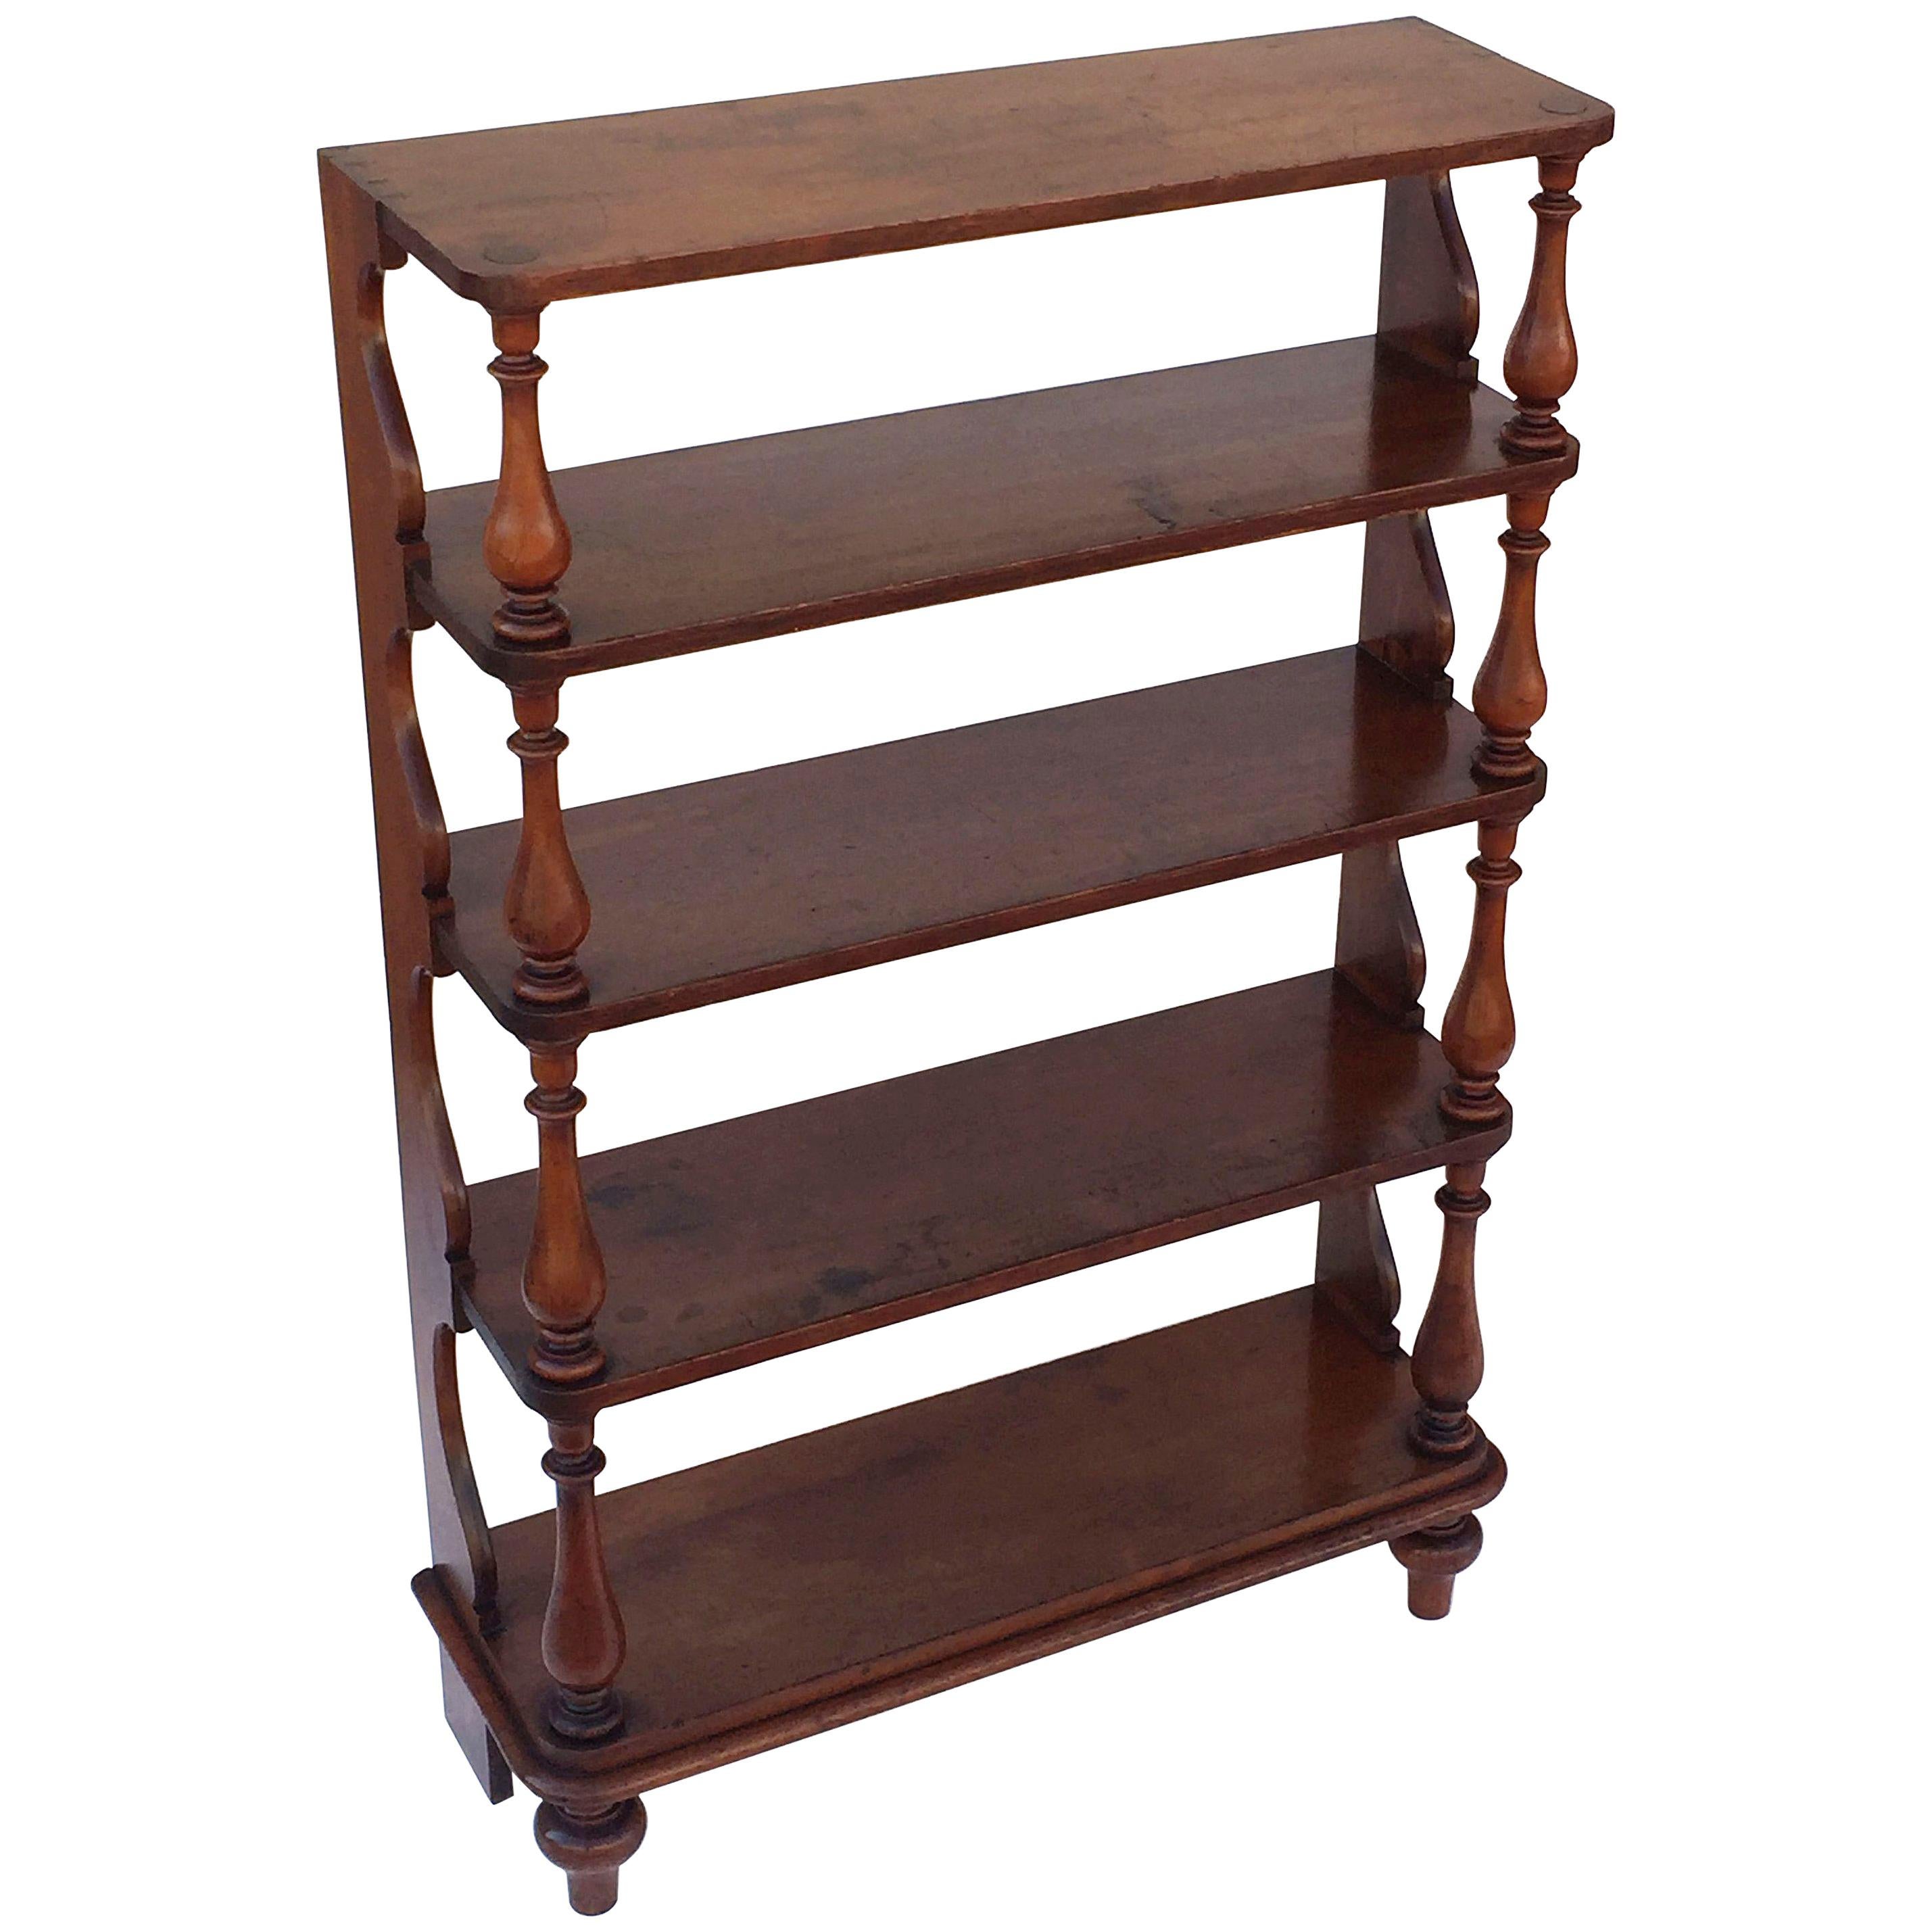 Tall English Standing Shelves or Bookcase Étagère of Fruitwood